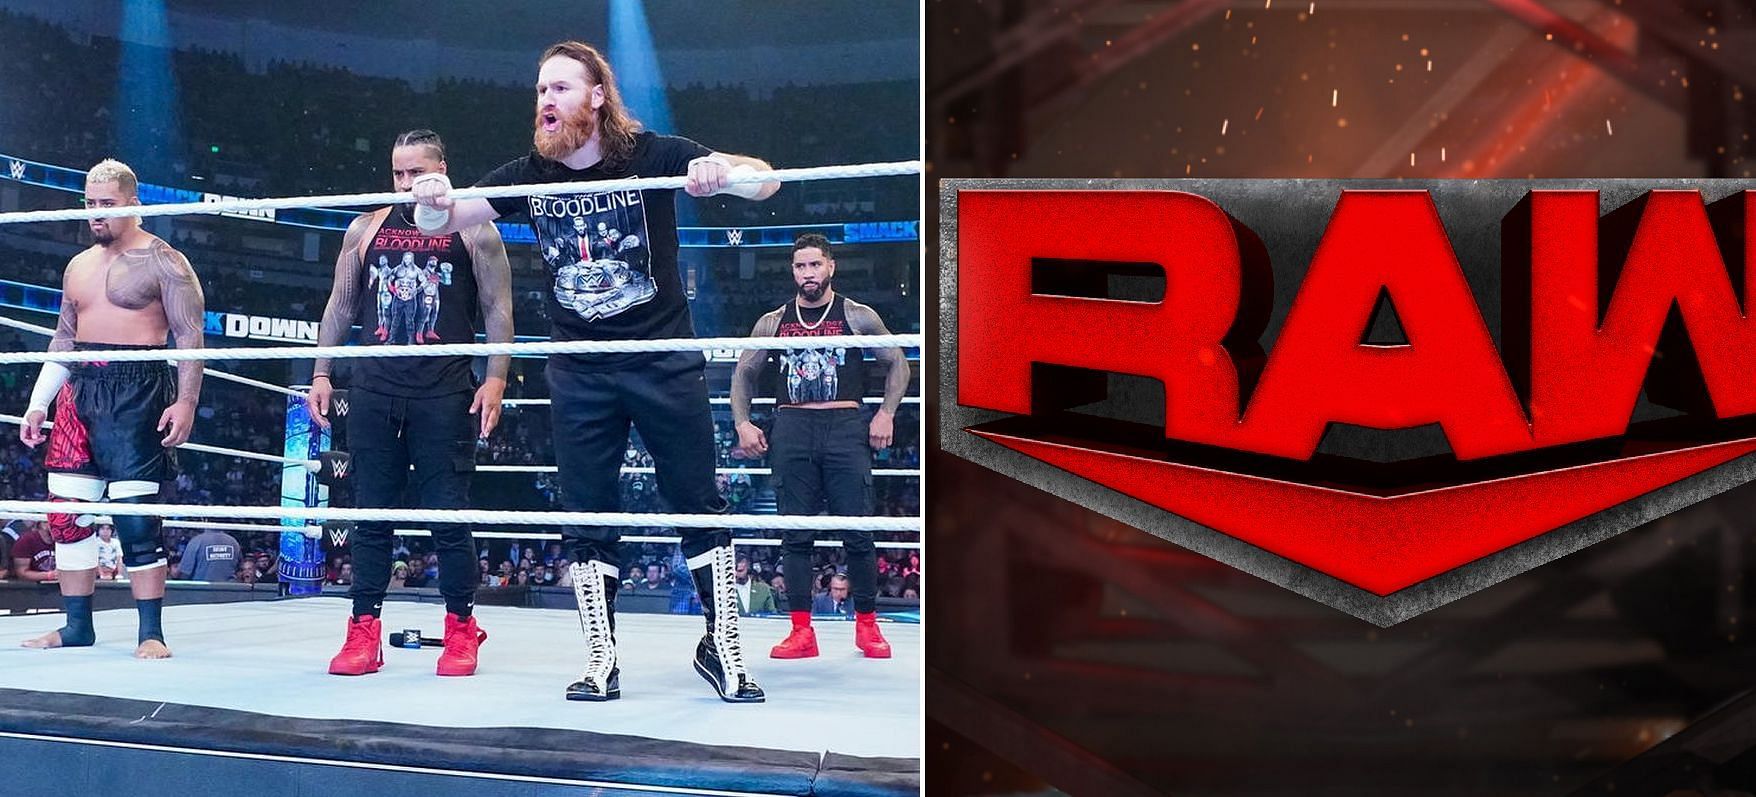 There were several botches this week on WWE RAW